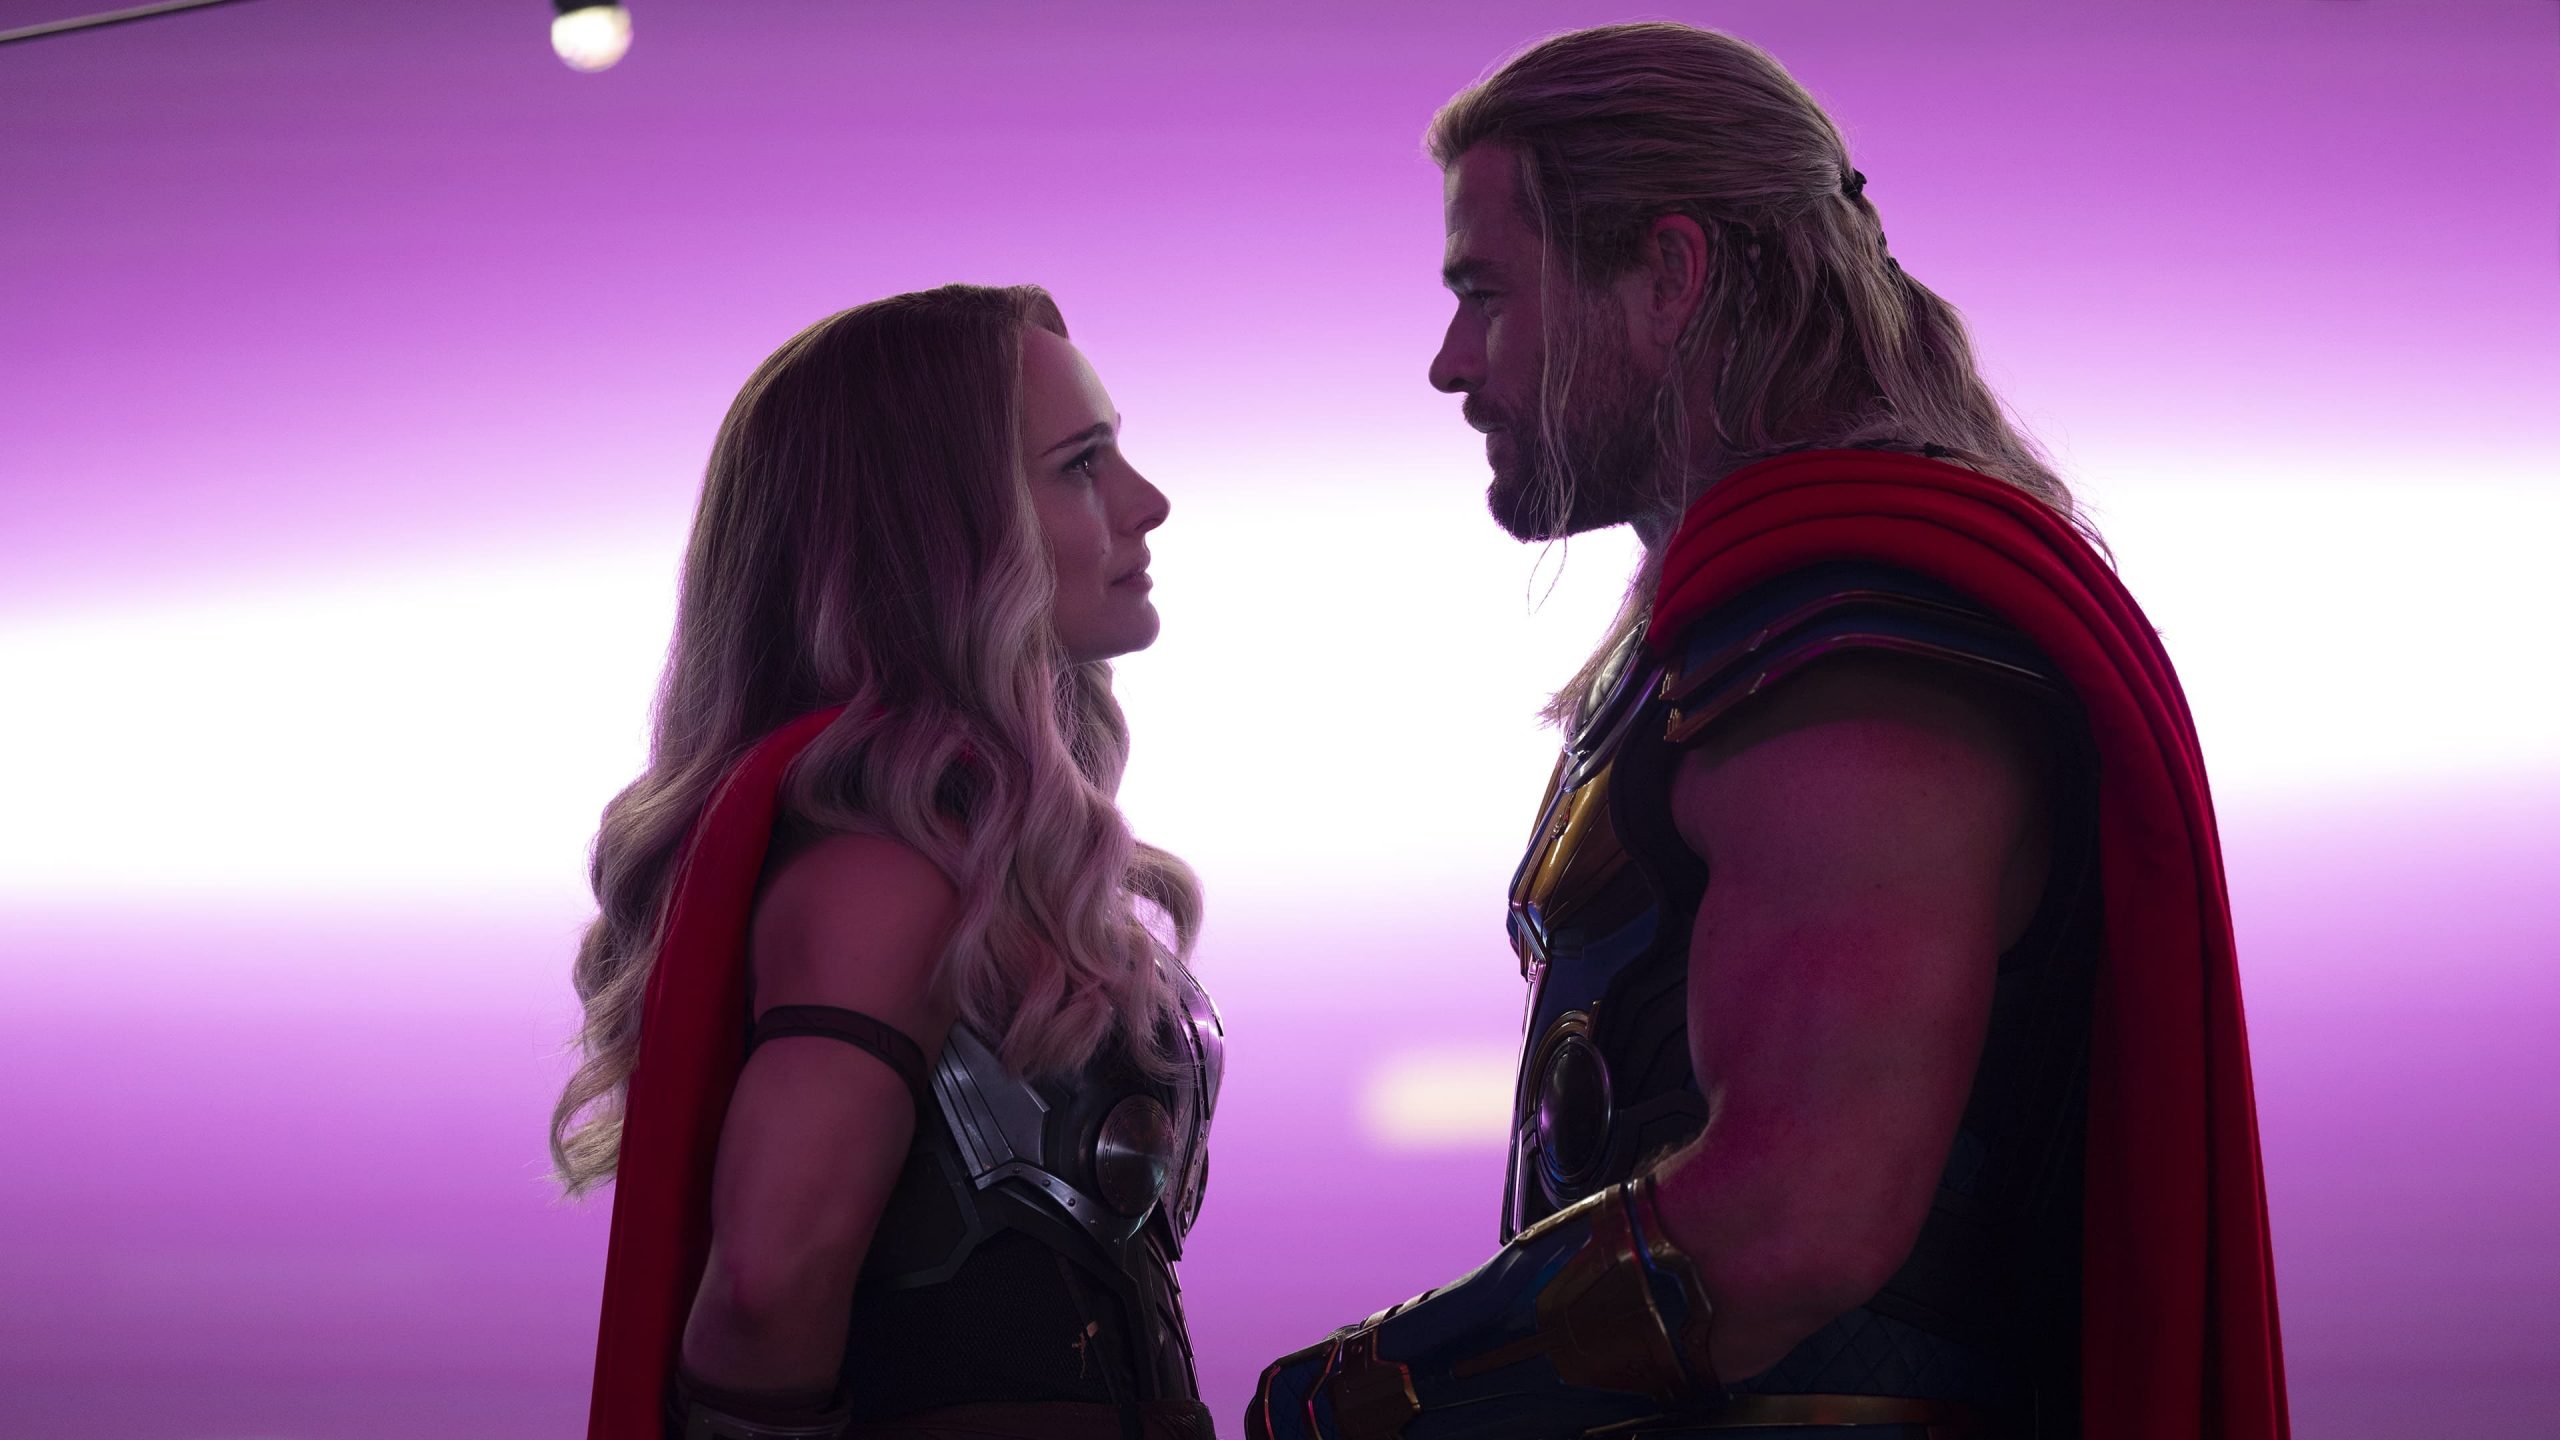 Index of Thor Love and Thunder (2022)